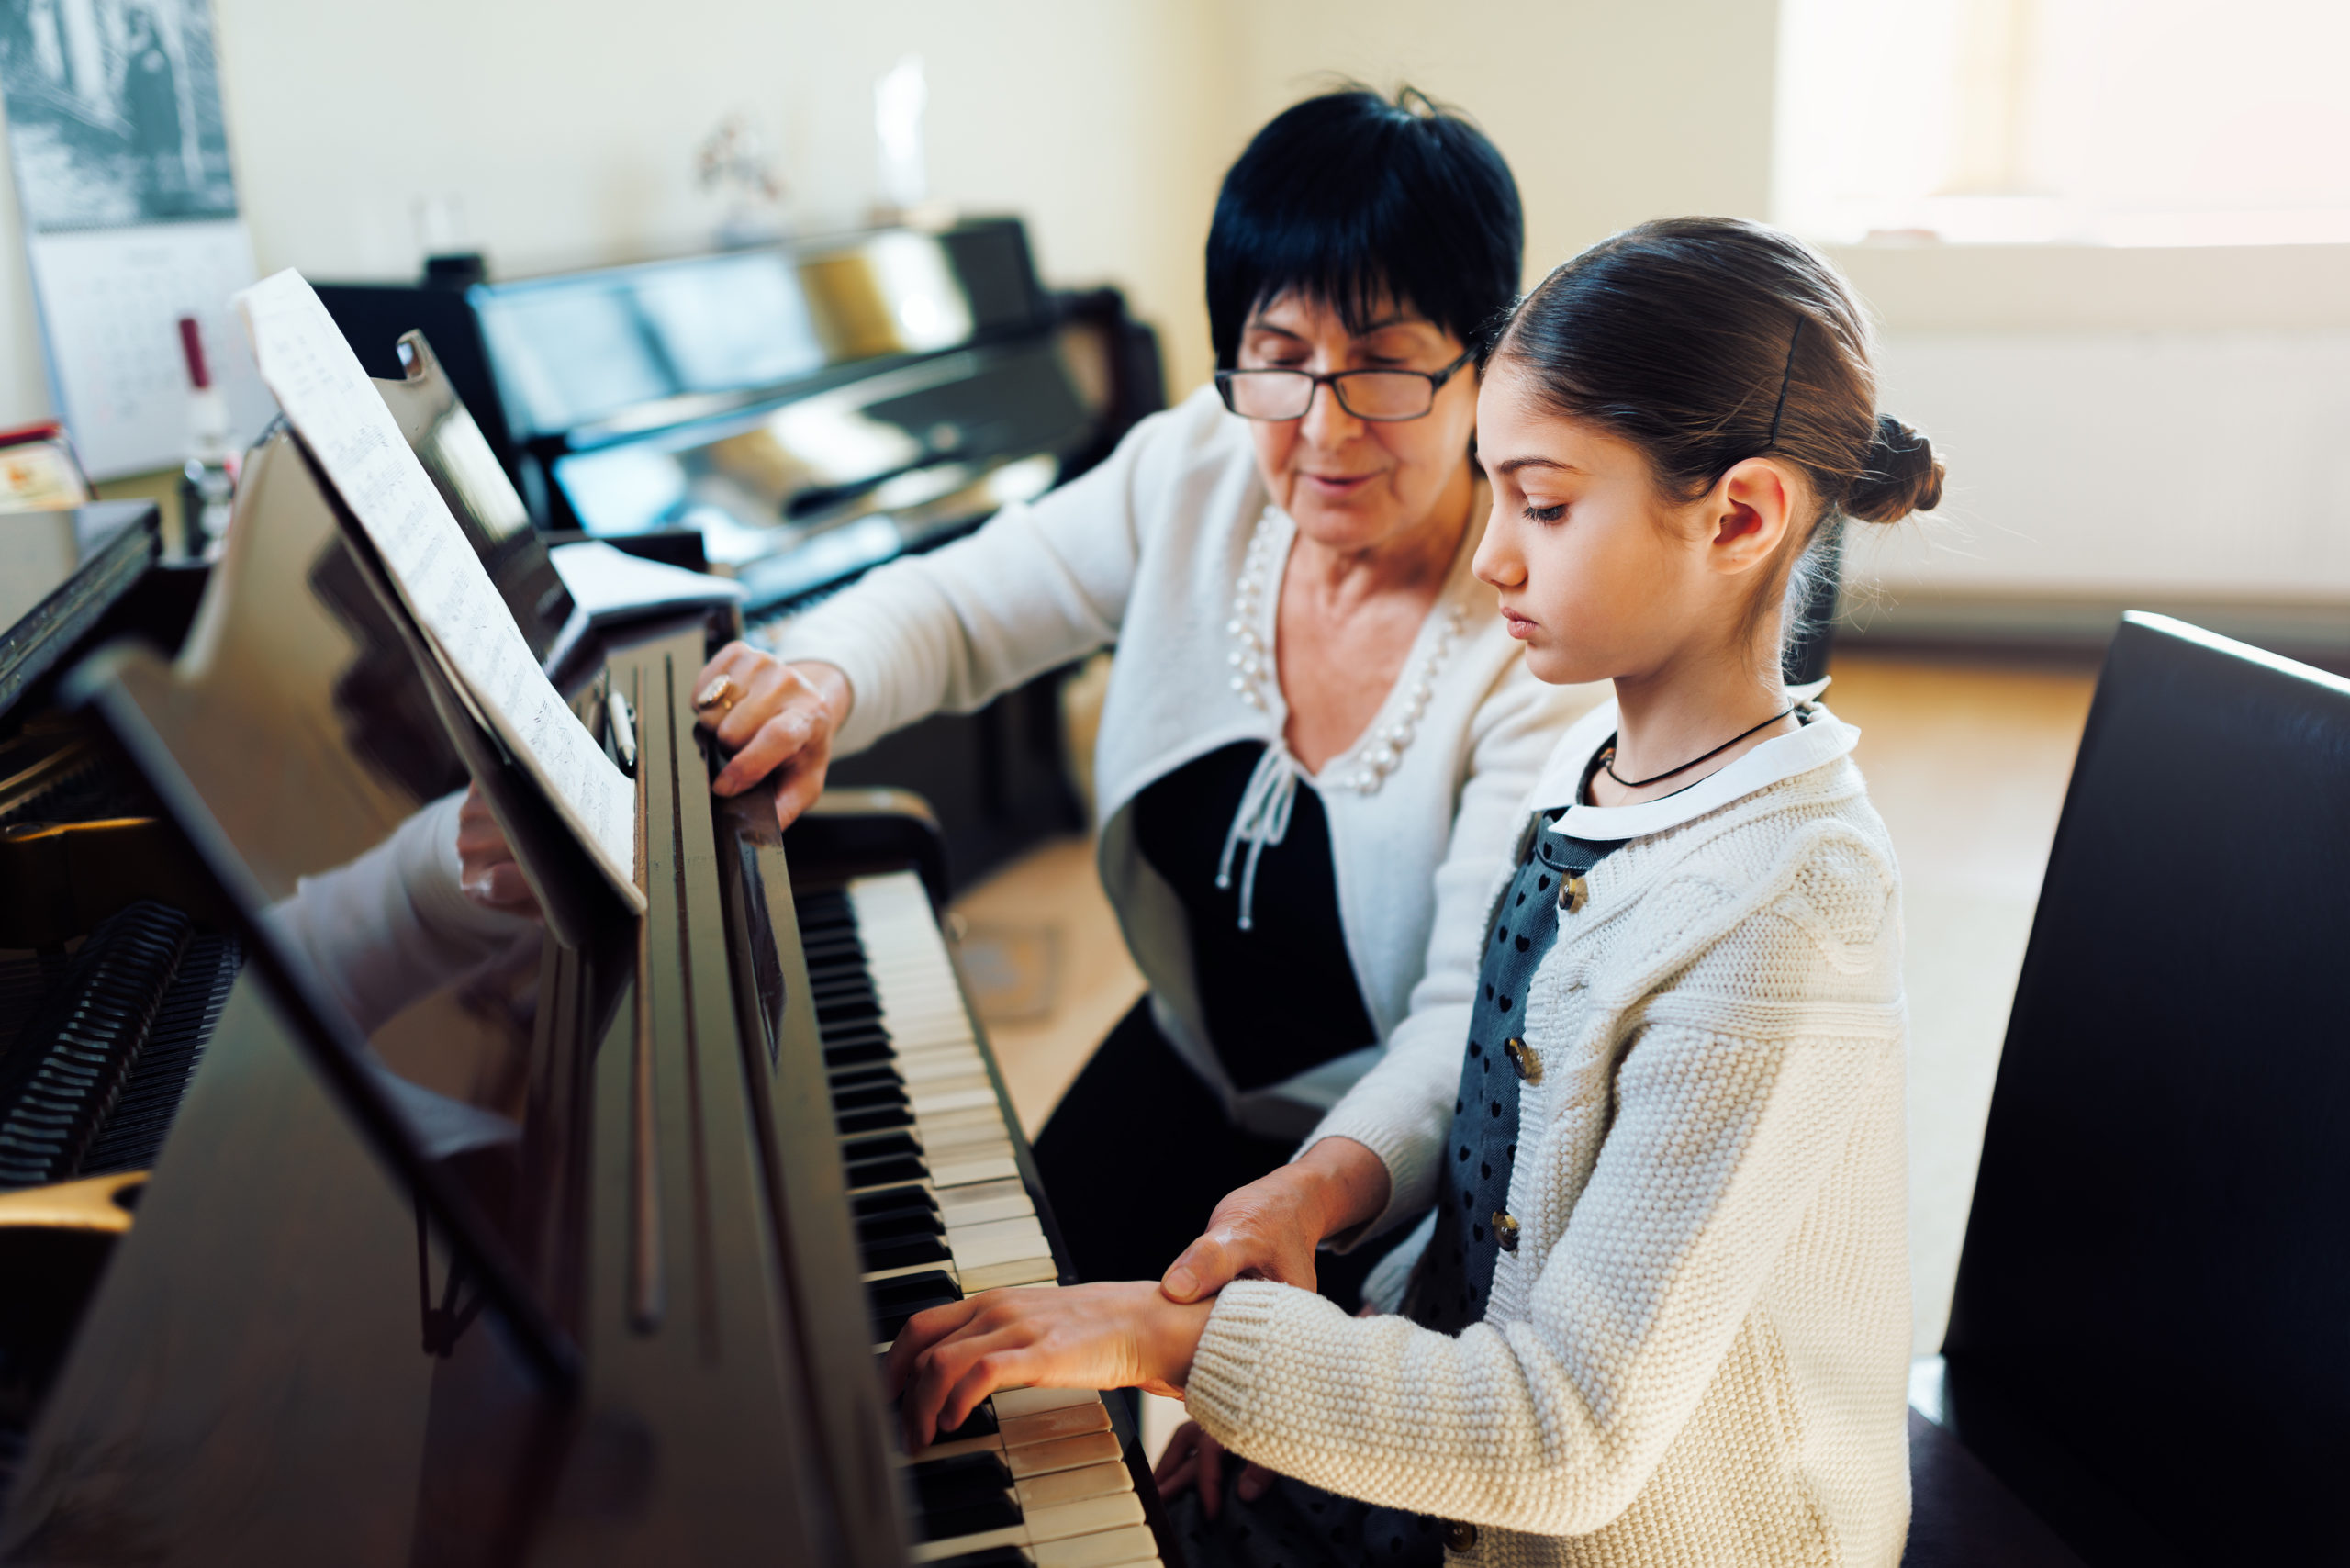 Online Piano Lessons: The 15 Best Sites and Apps - La Touche Musicale